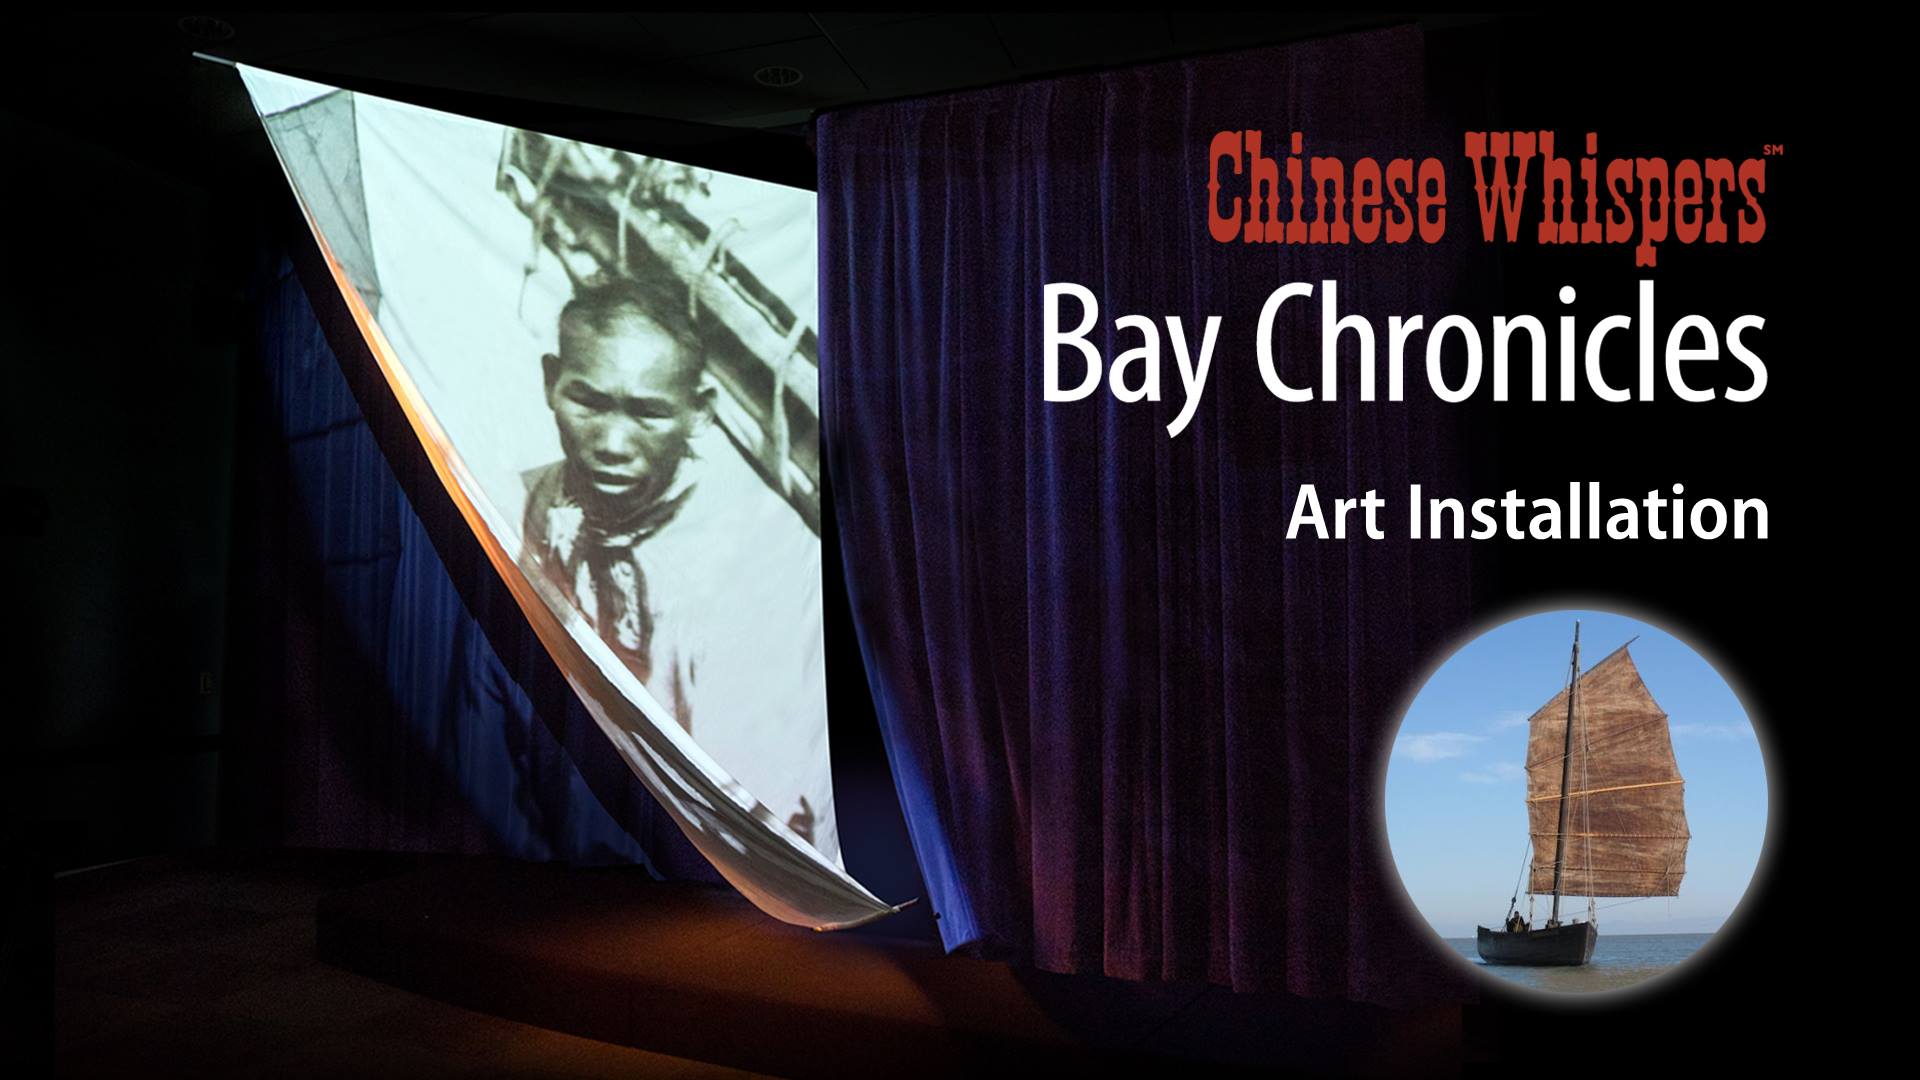 Rene Yung’s Chinese Whispers: Bay Chronicles Through January 10